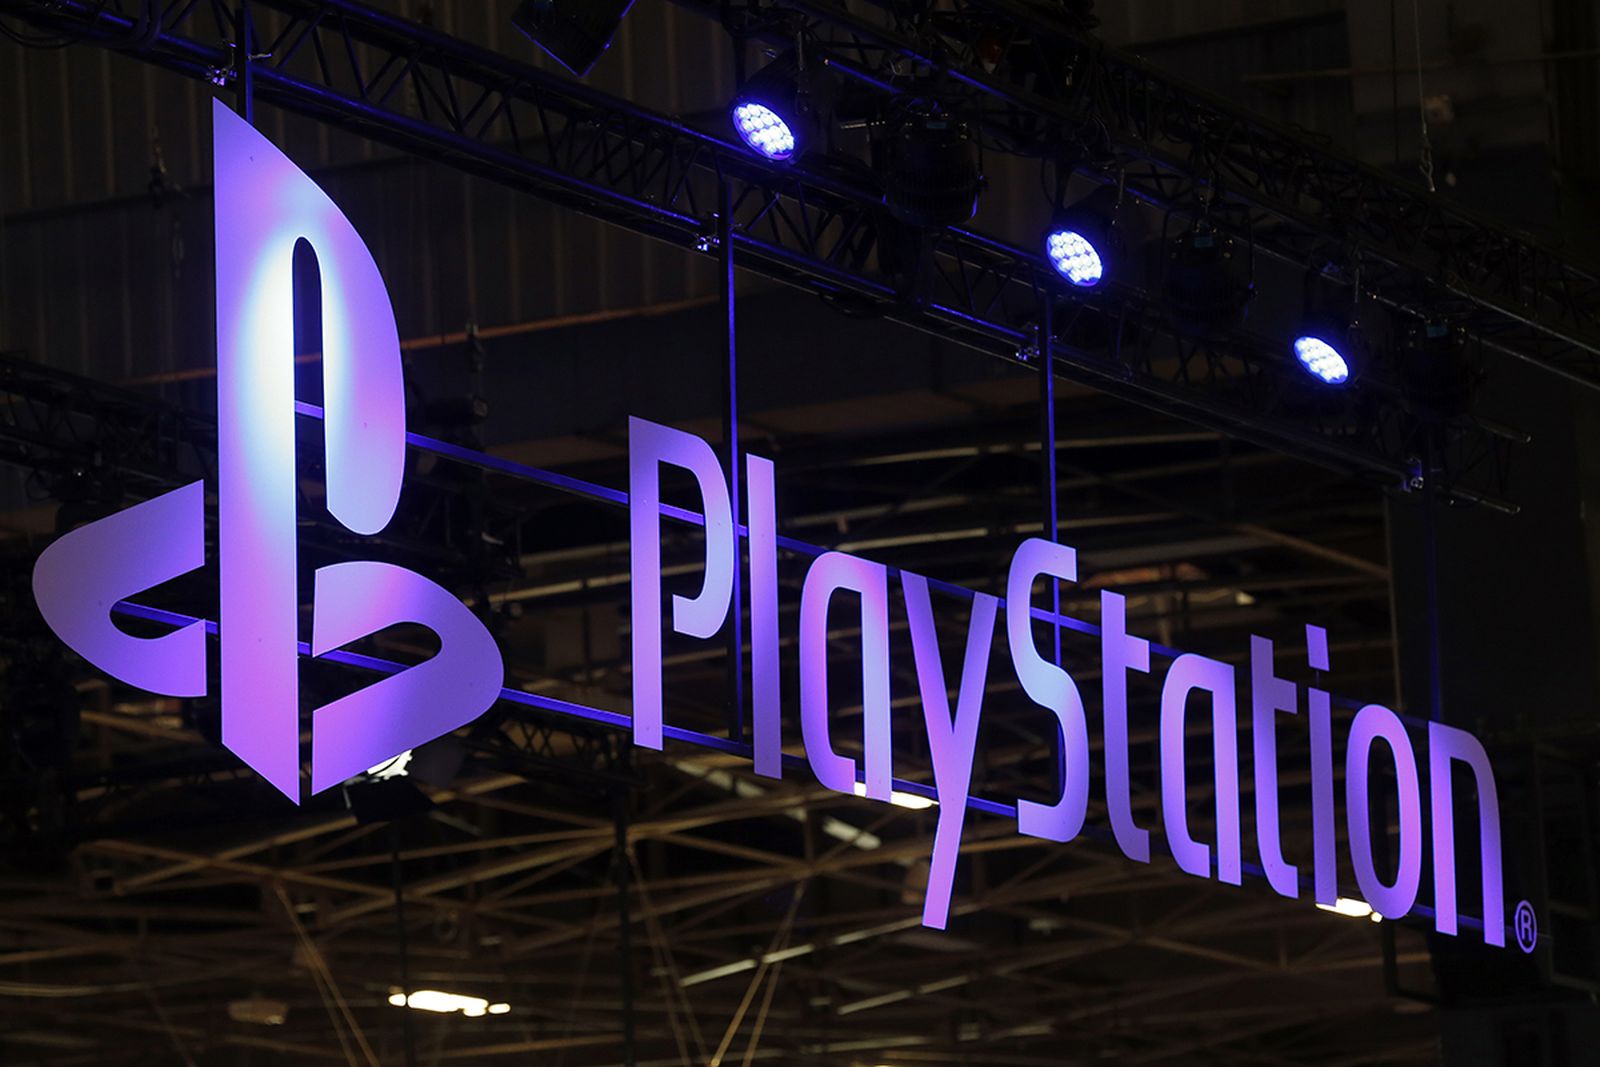 The Sony PlayStation logo is displayed during the 'Paris Games Week'